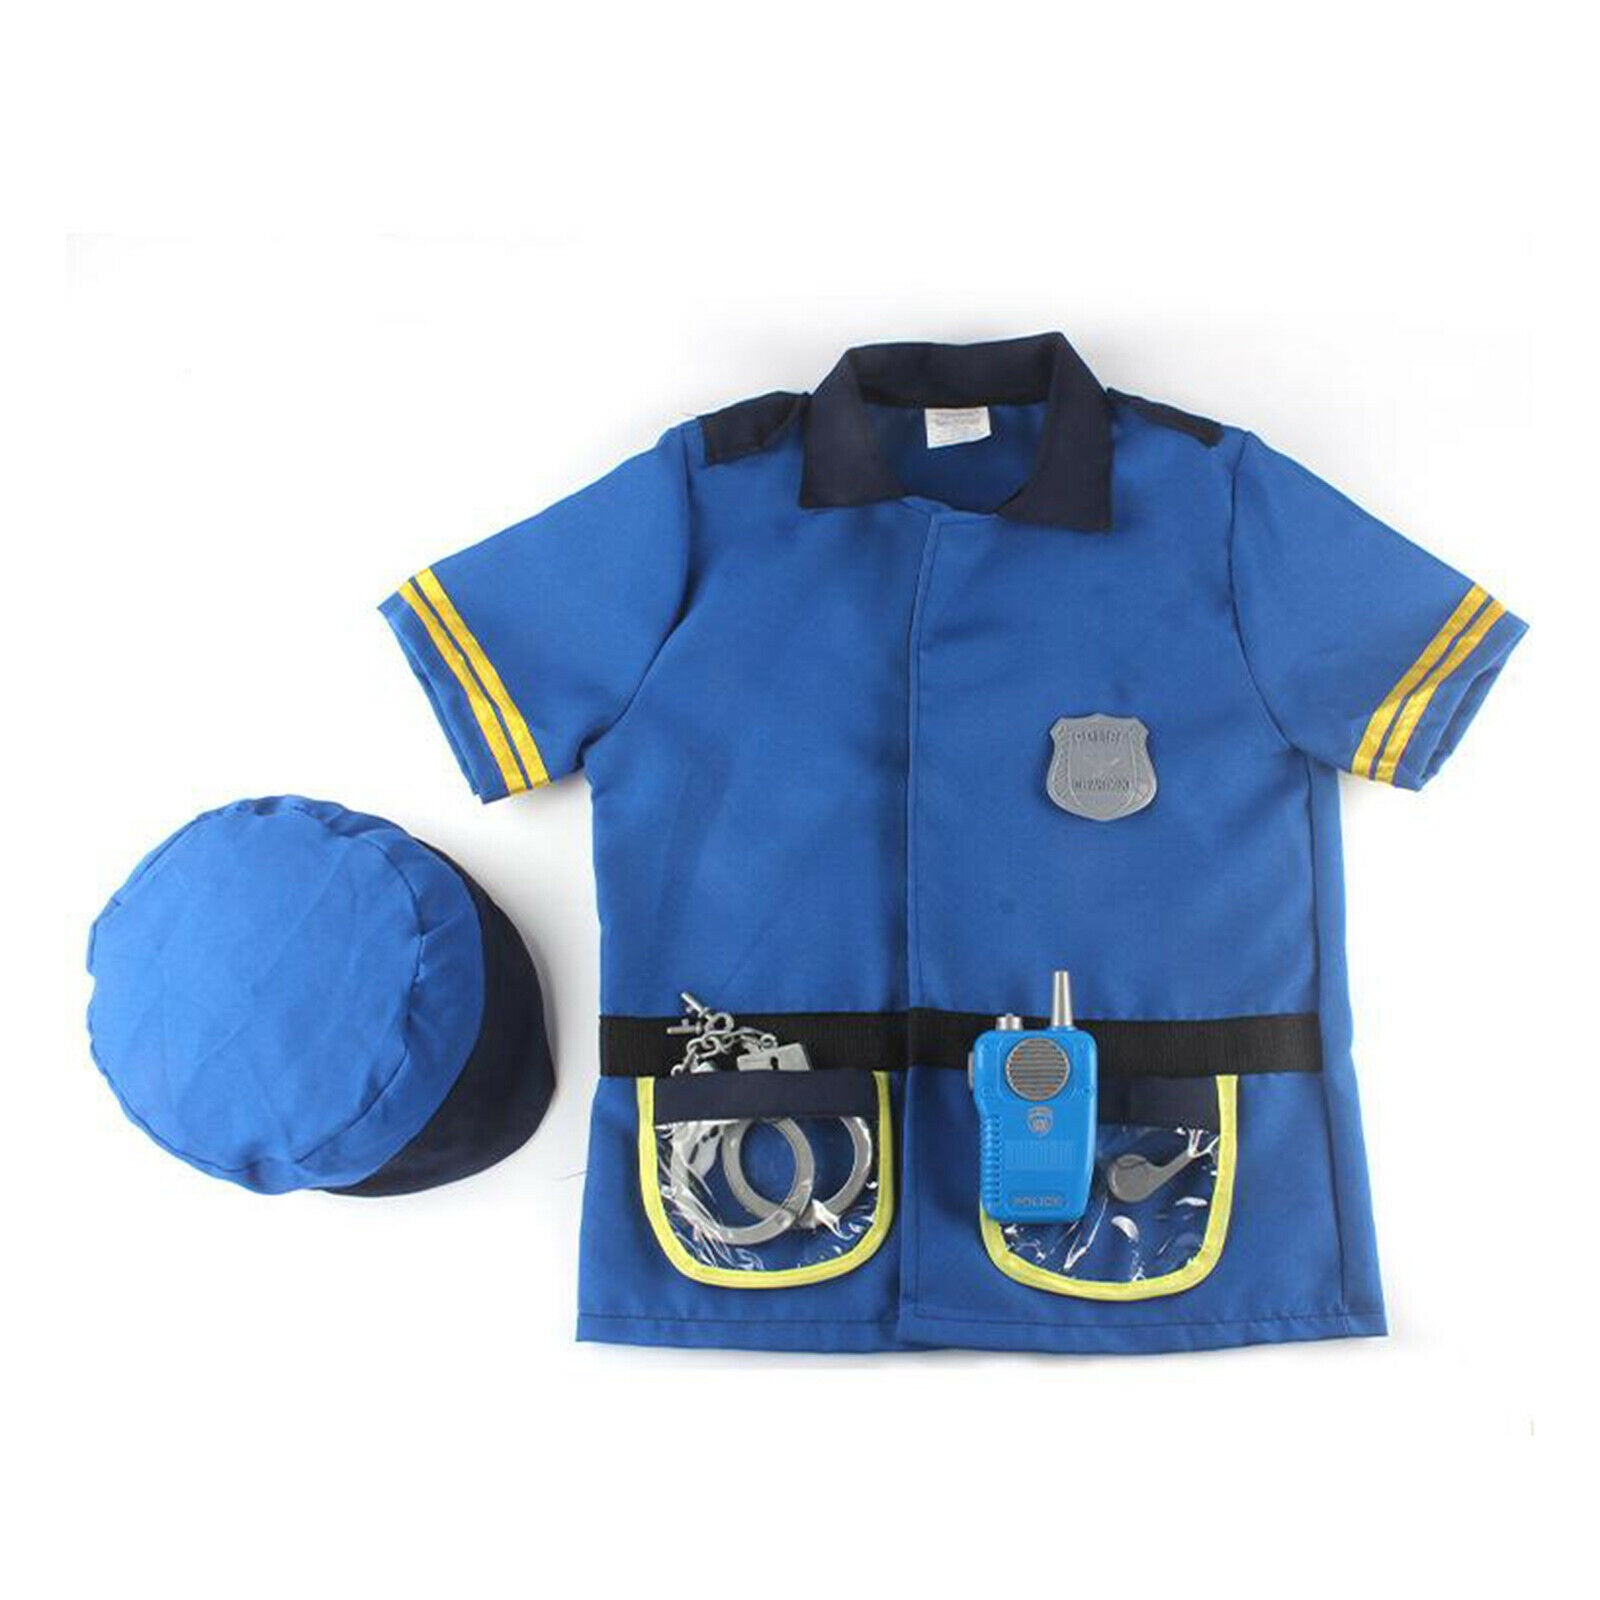 6 Pieces Kid Police Officer Career Costume Occupation for Pretend Play